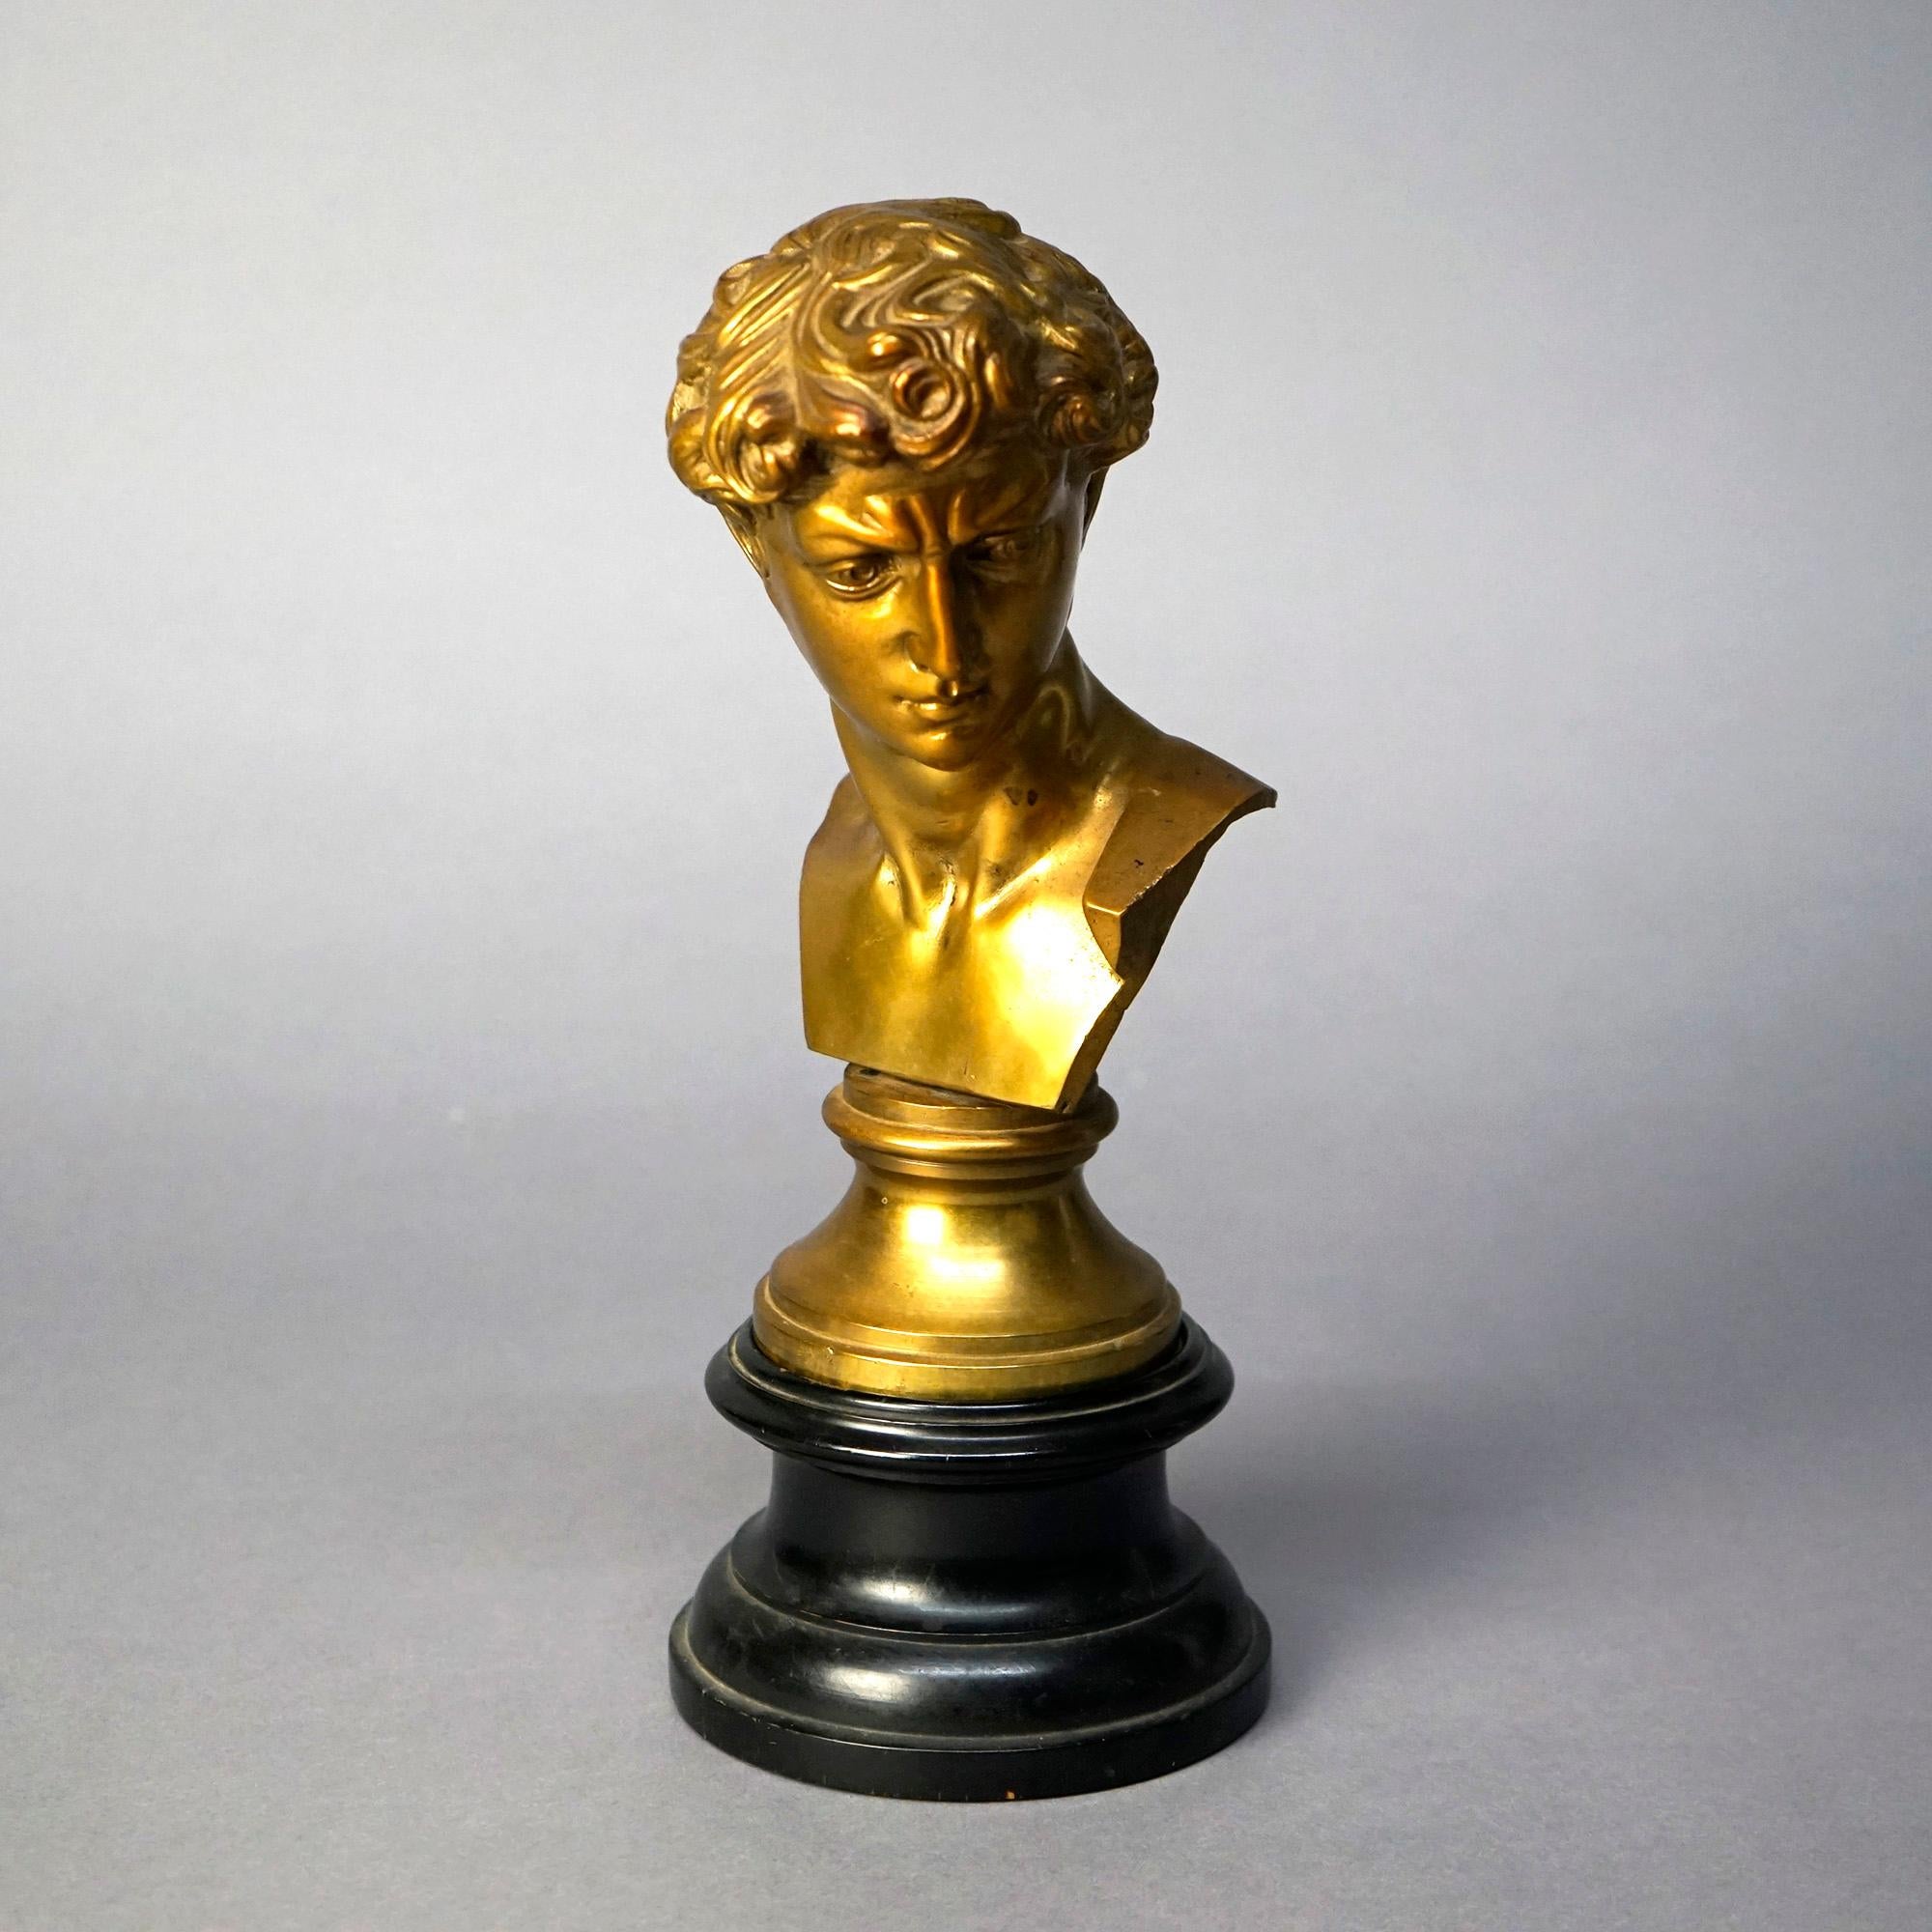 An antique Neoclassical sculpture offers cast and gilt bronze construction and depicts bust of a Classical man, 19th century

Measures- 12''H x 4.75''W x 6''D